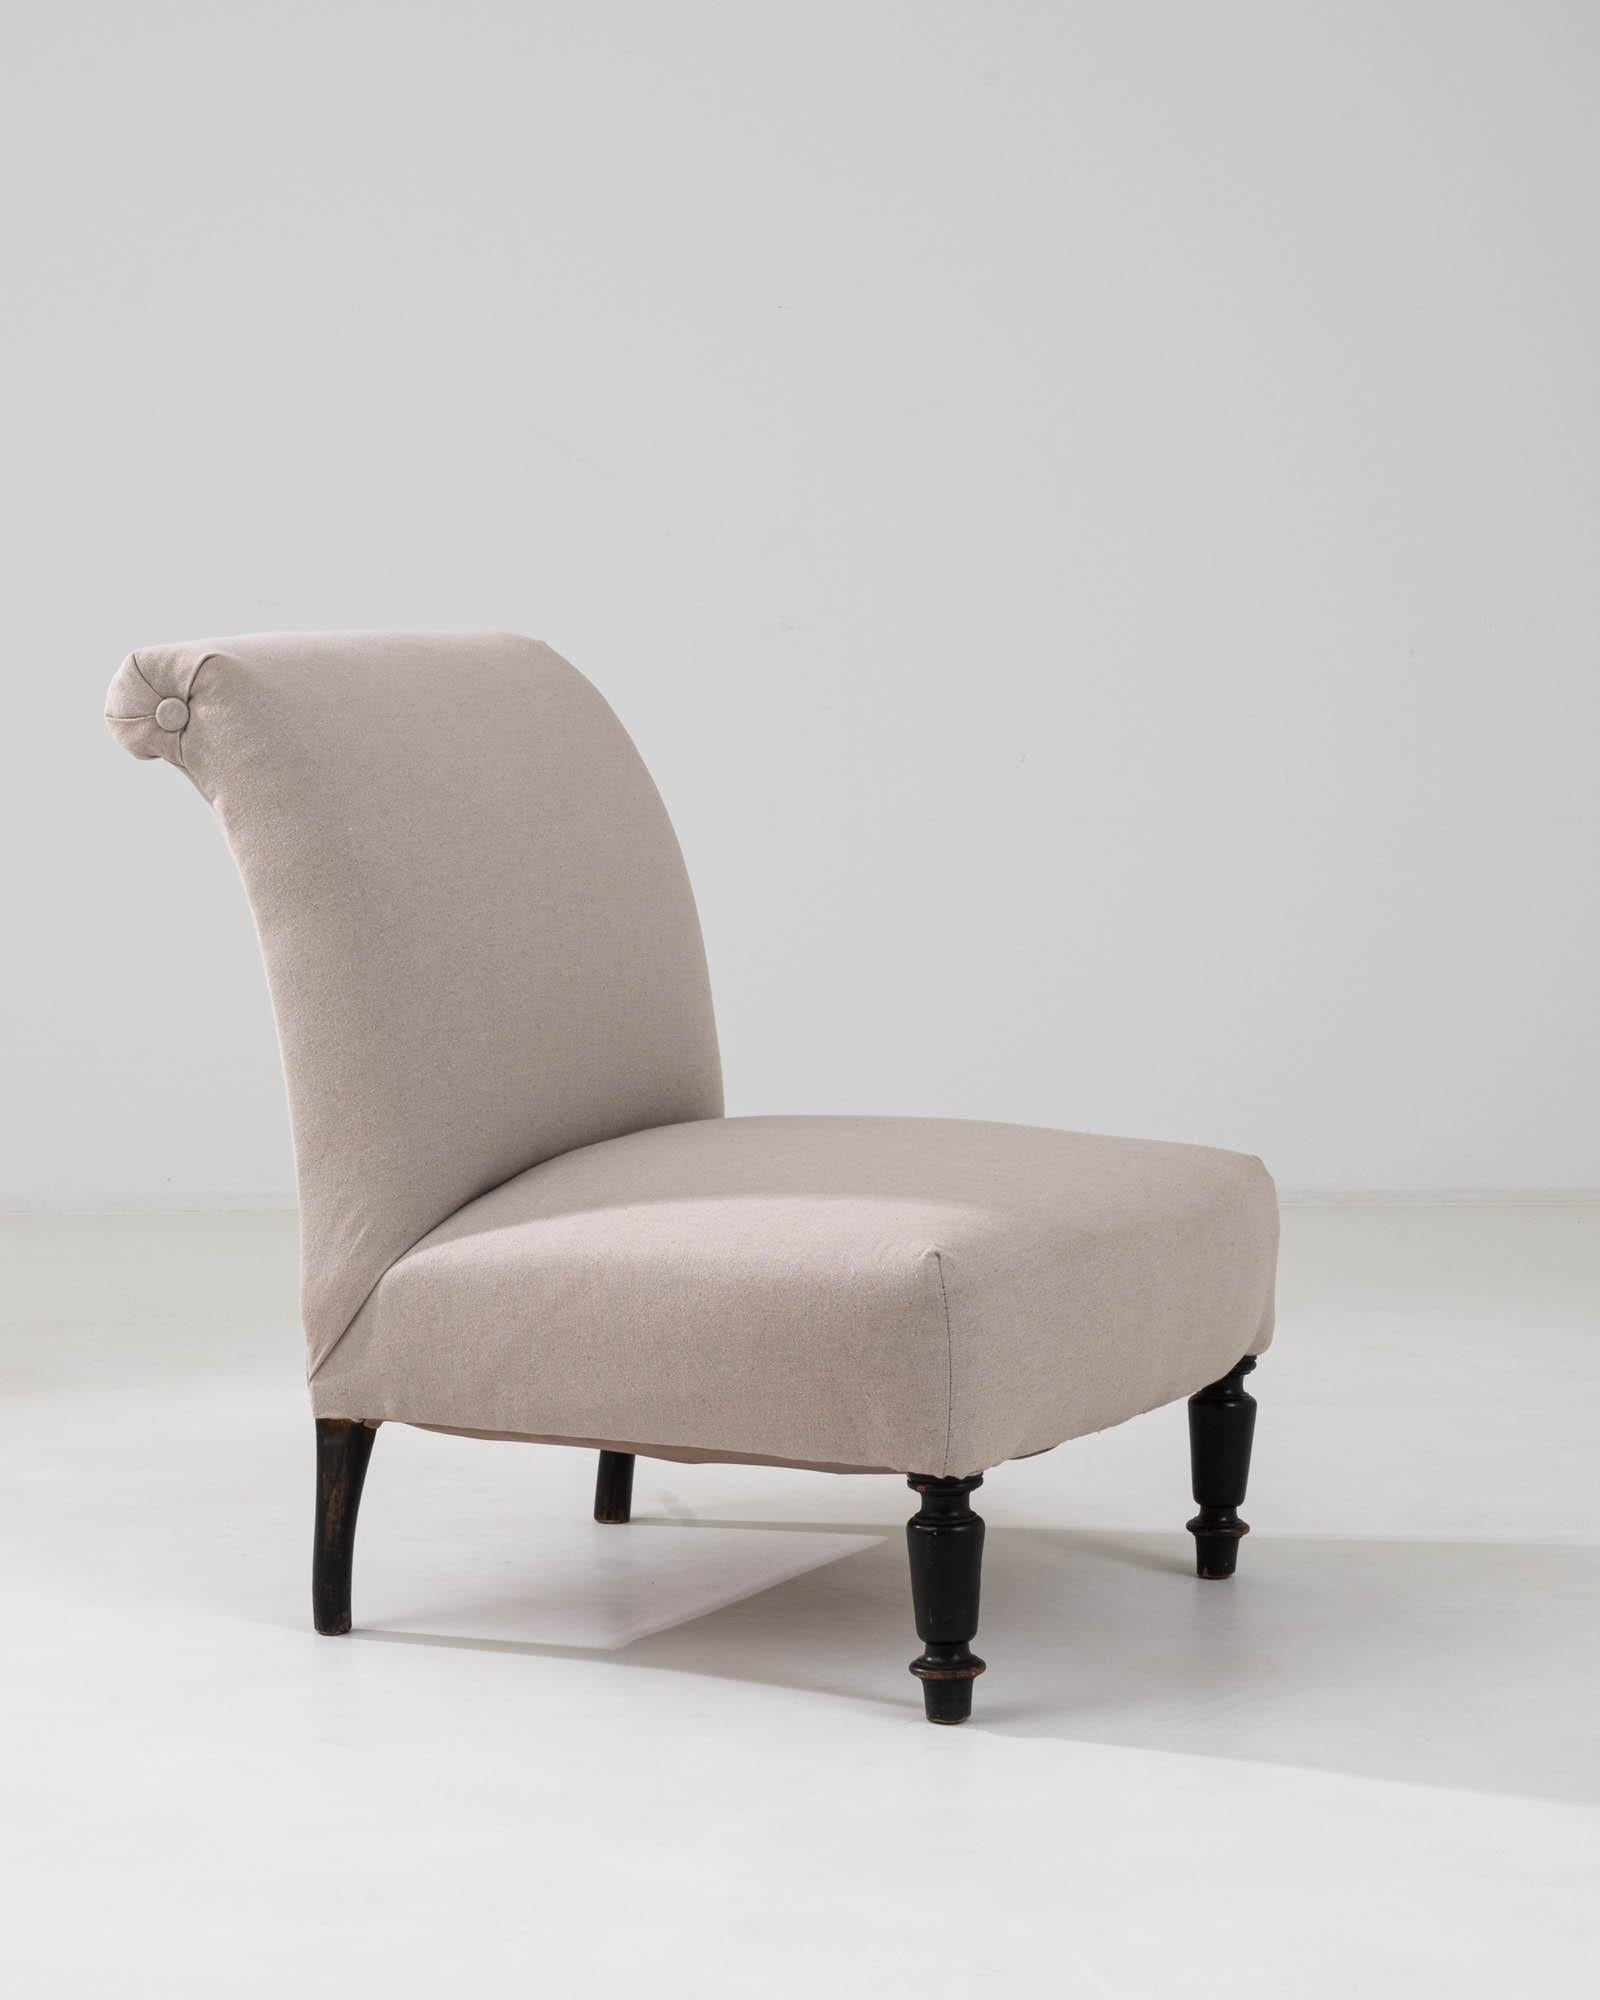 This 19th Century French upholstered chair offers a graceful blend of classic comfort and antique sophistication. Its elegantly curved silhouette provides a soft backdrop, while the refined beige upholstery showcases a subtle texture that invites